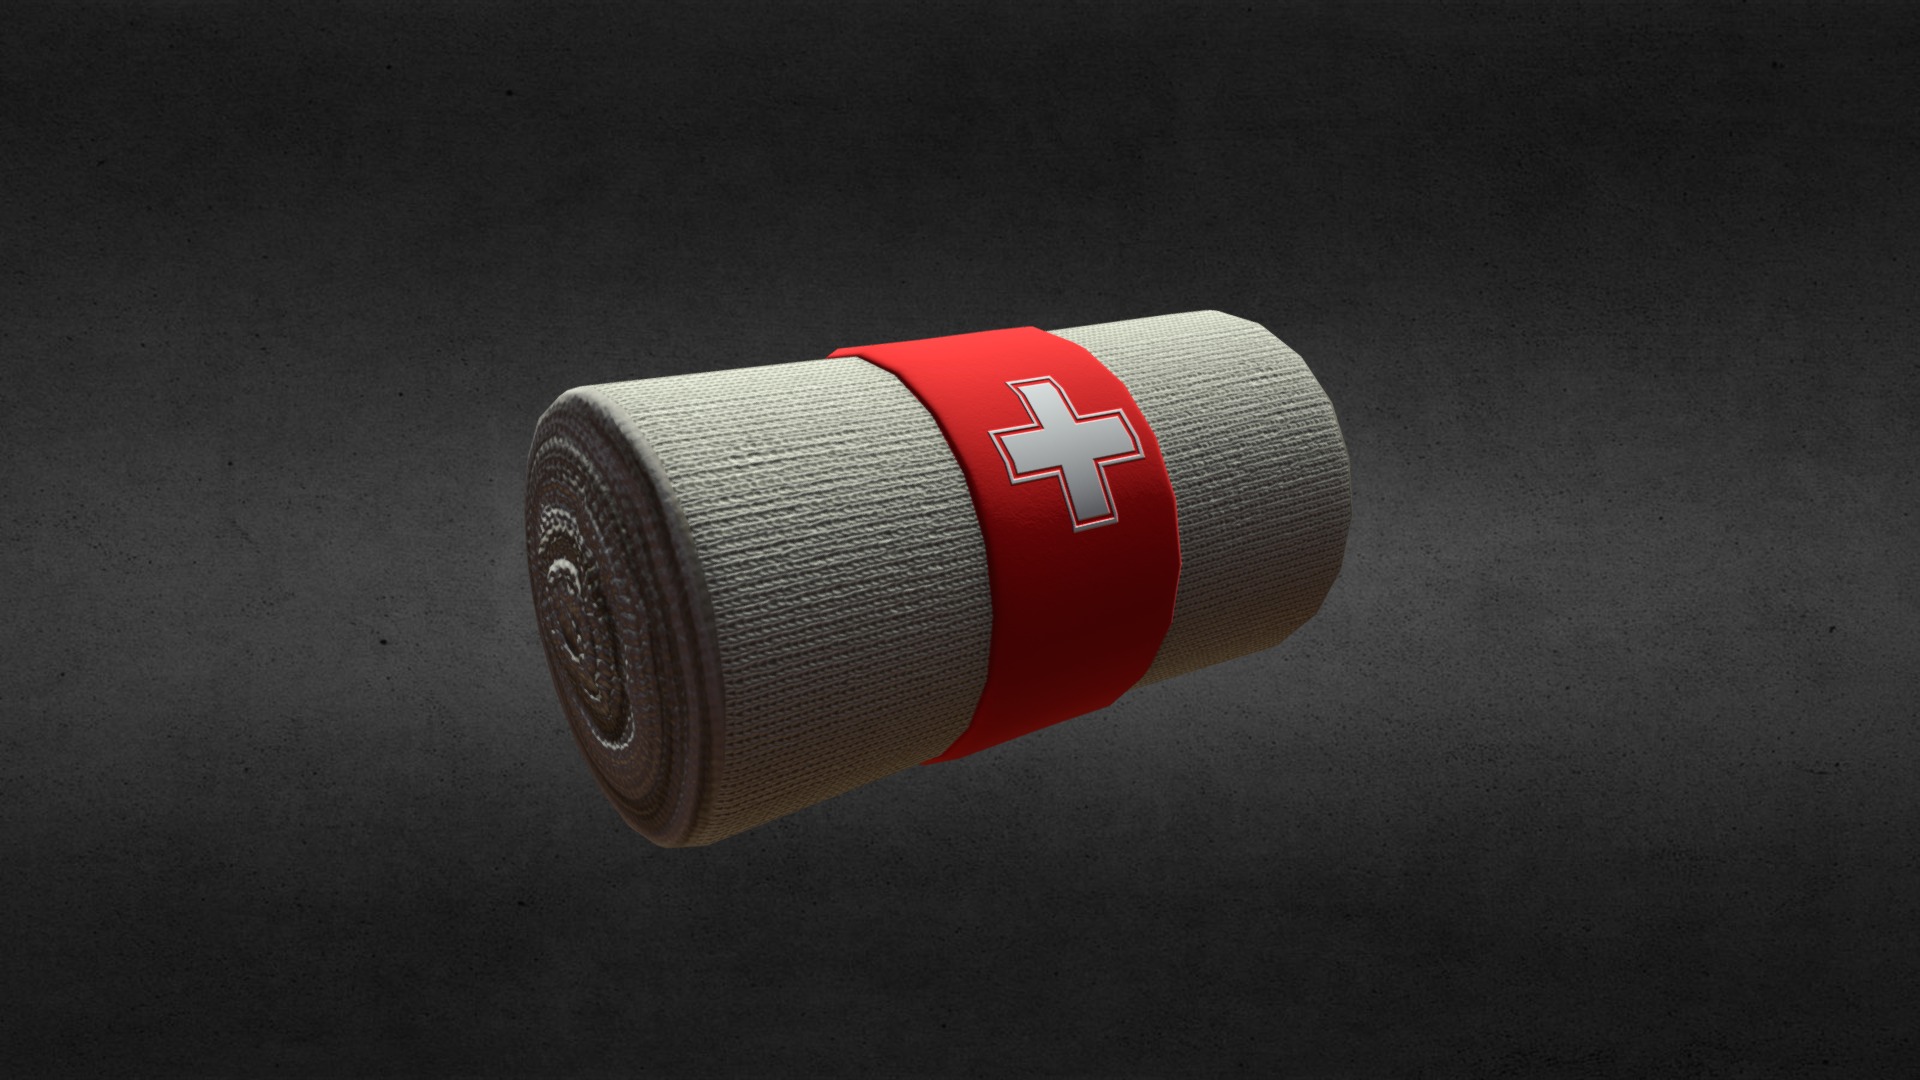 3D model Health – Elastic Adhesive Bandage - This is a 3D model of the Health - Elastic Adhesive Bandage. The 3D model is about a red and white cylindrical object.